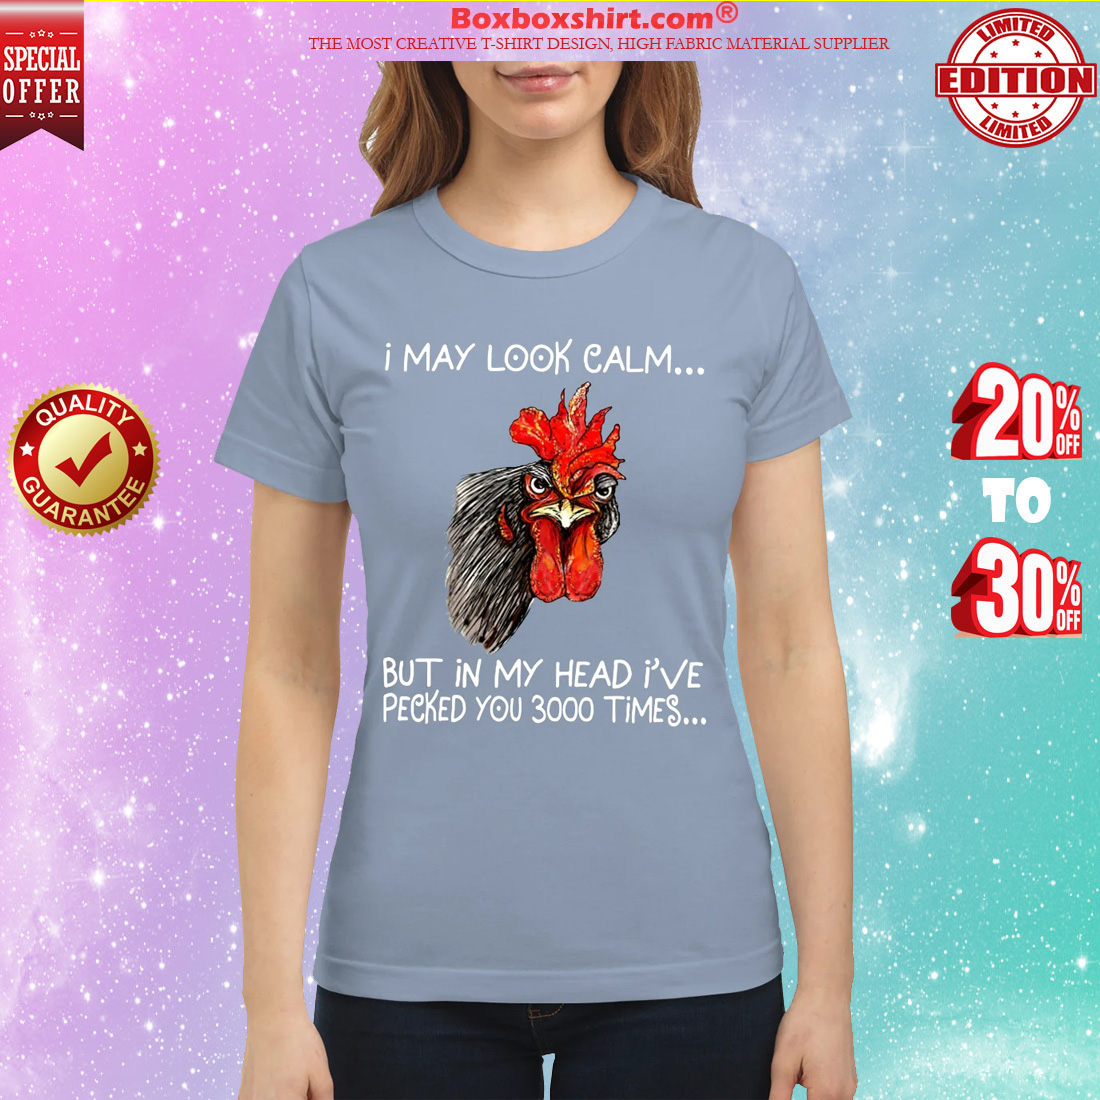 Chicken I may look calm but in my head I've pecked you 3000 times classic shirt